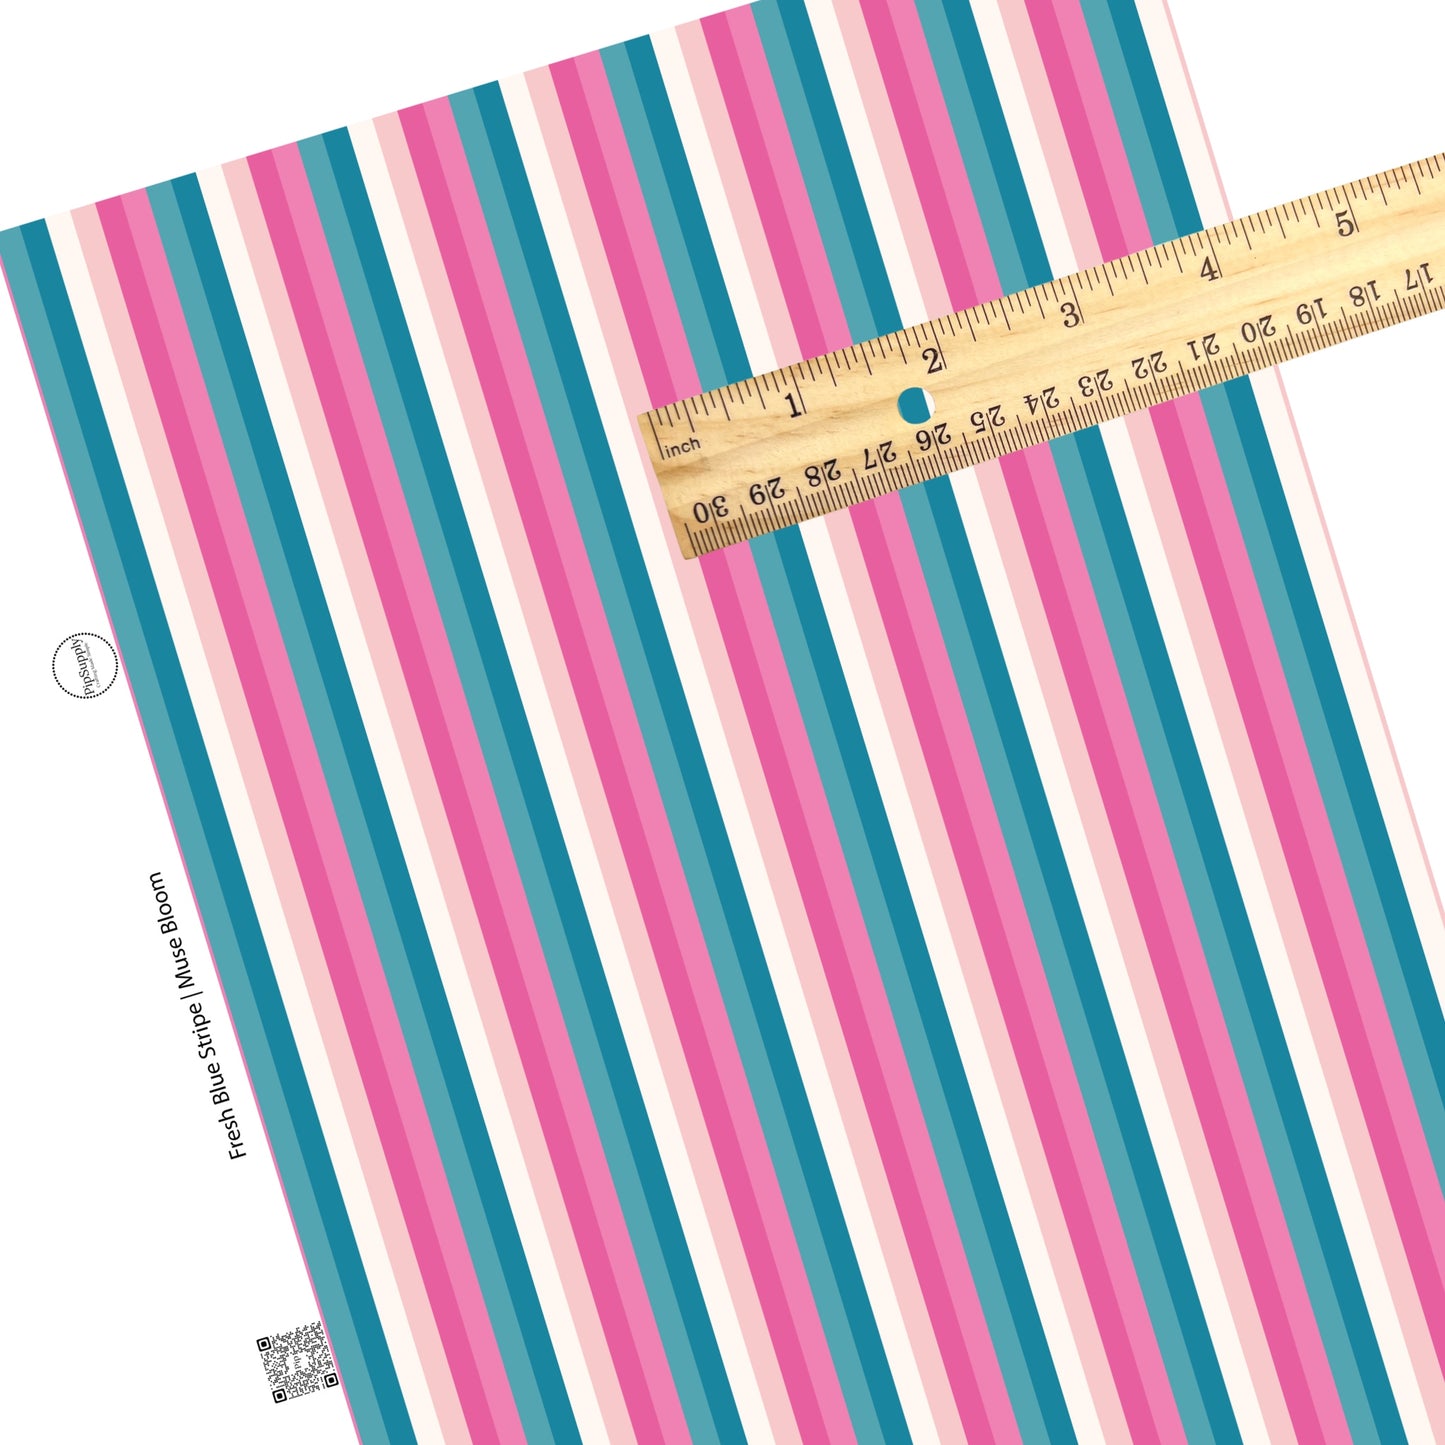 These stripe themed blue, cream, and pink faux leather sheets contain the following design elements: white, cream, light pink, pink, teal, and blue stripes. 